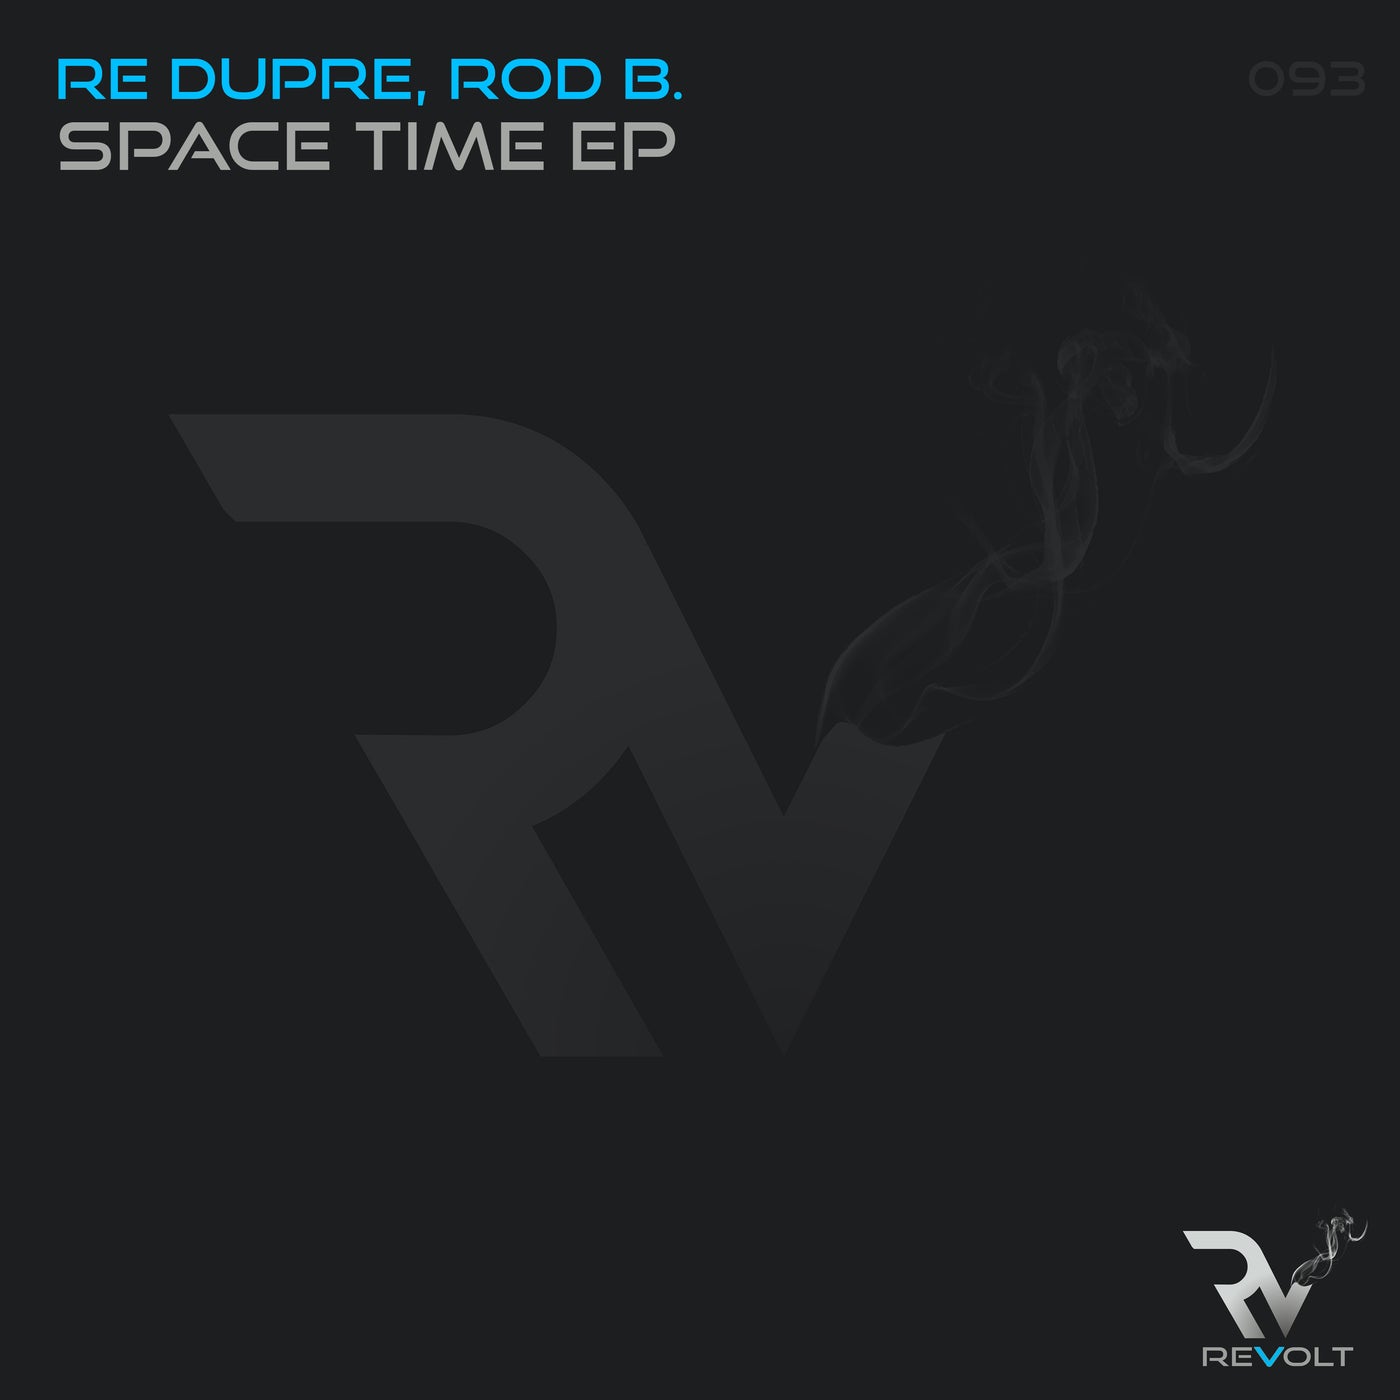 Re Dupre, Rod B. – Space Time EP [RM093]